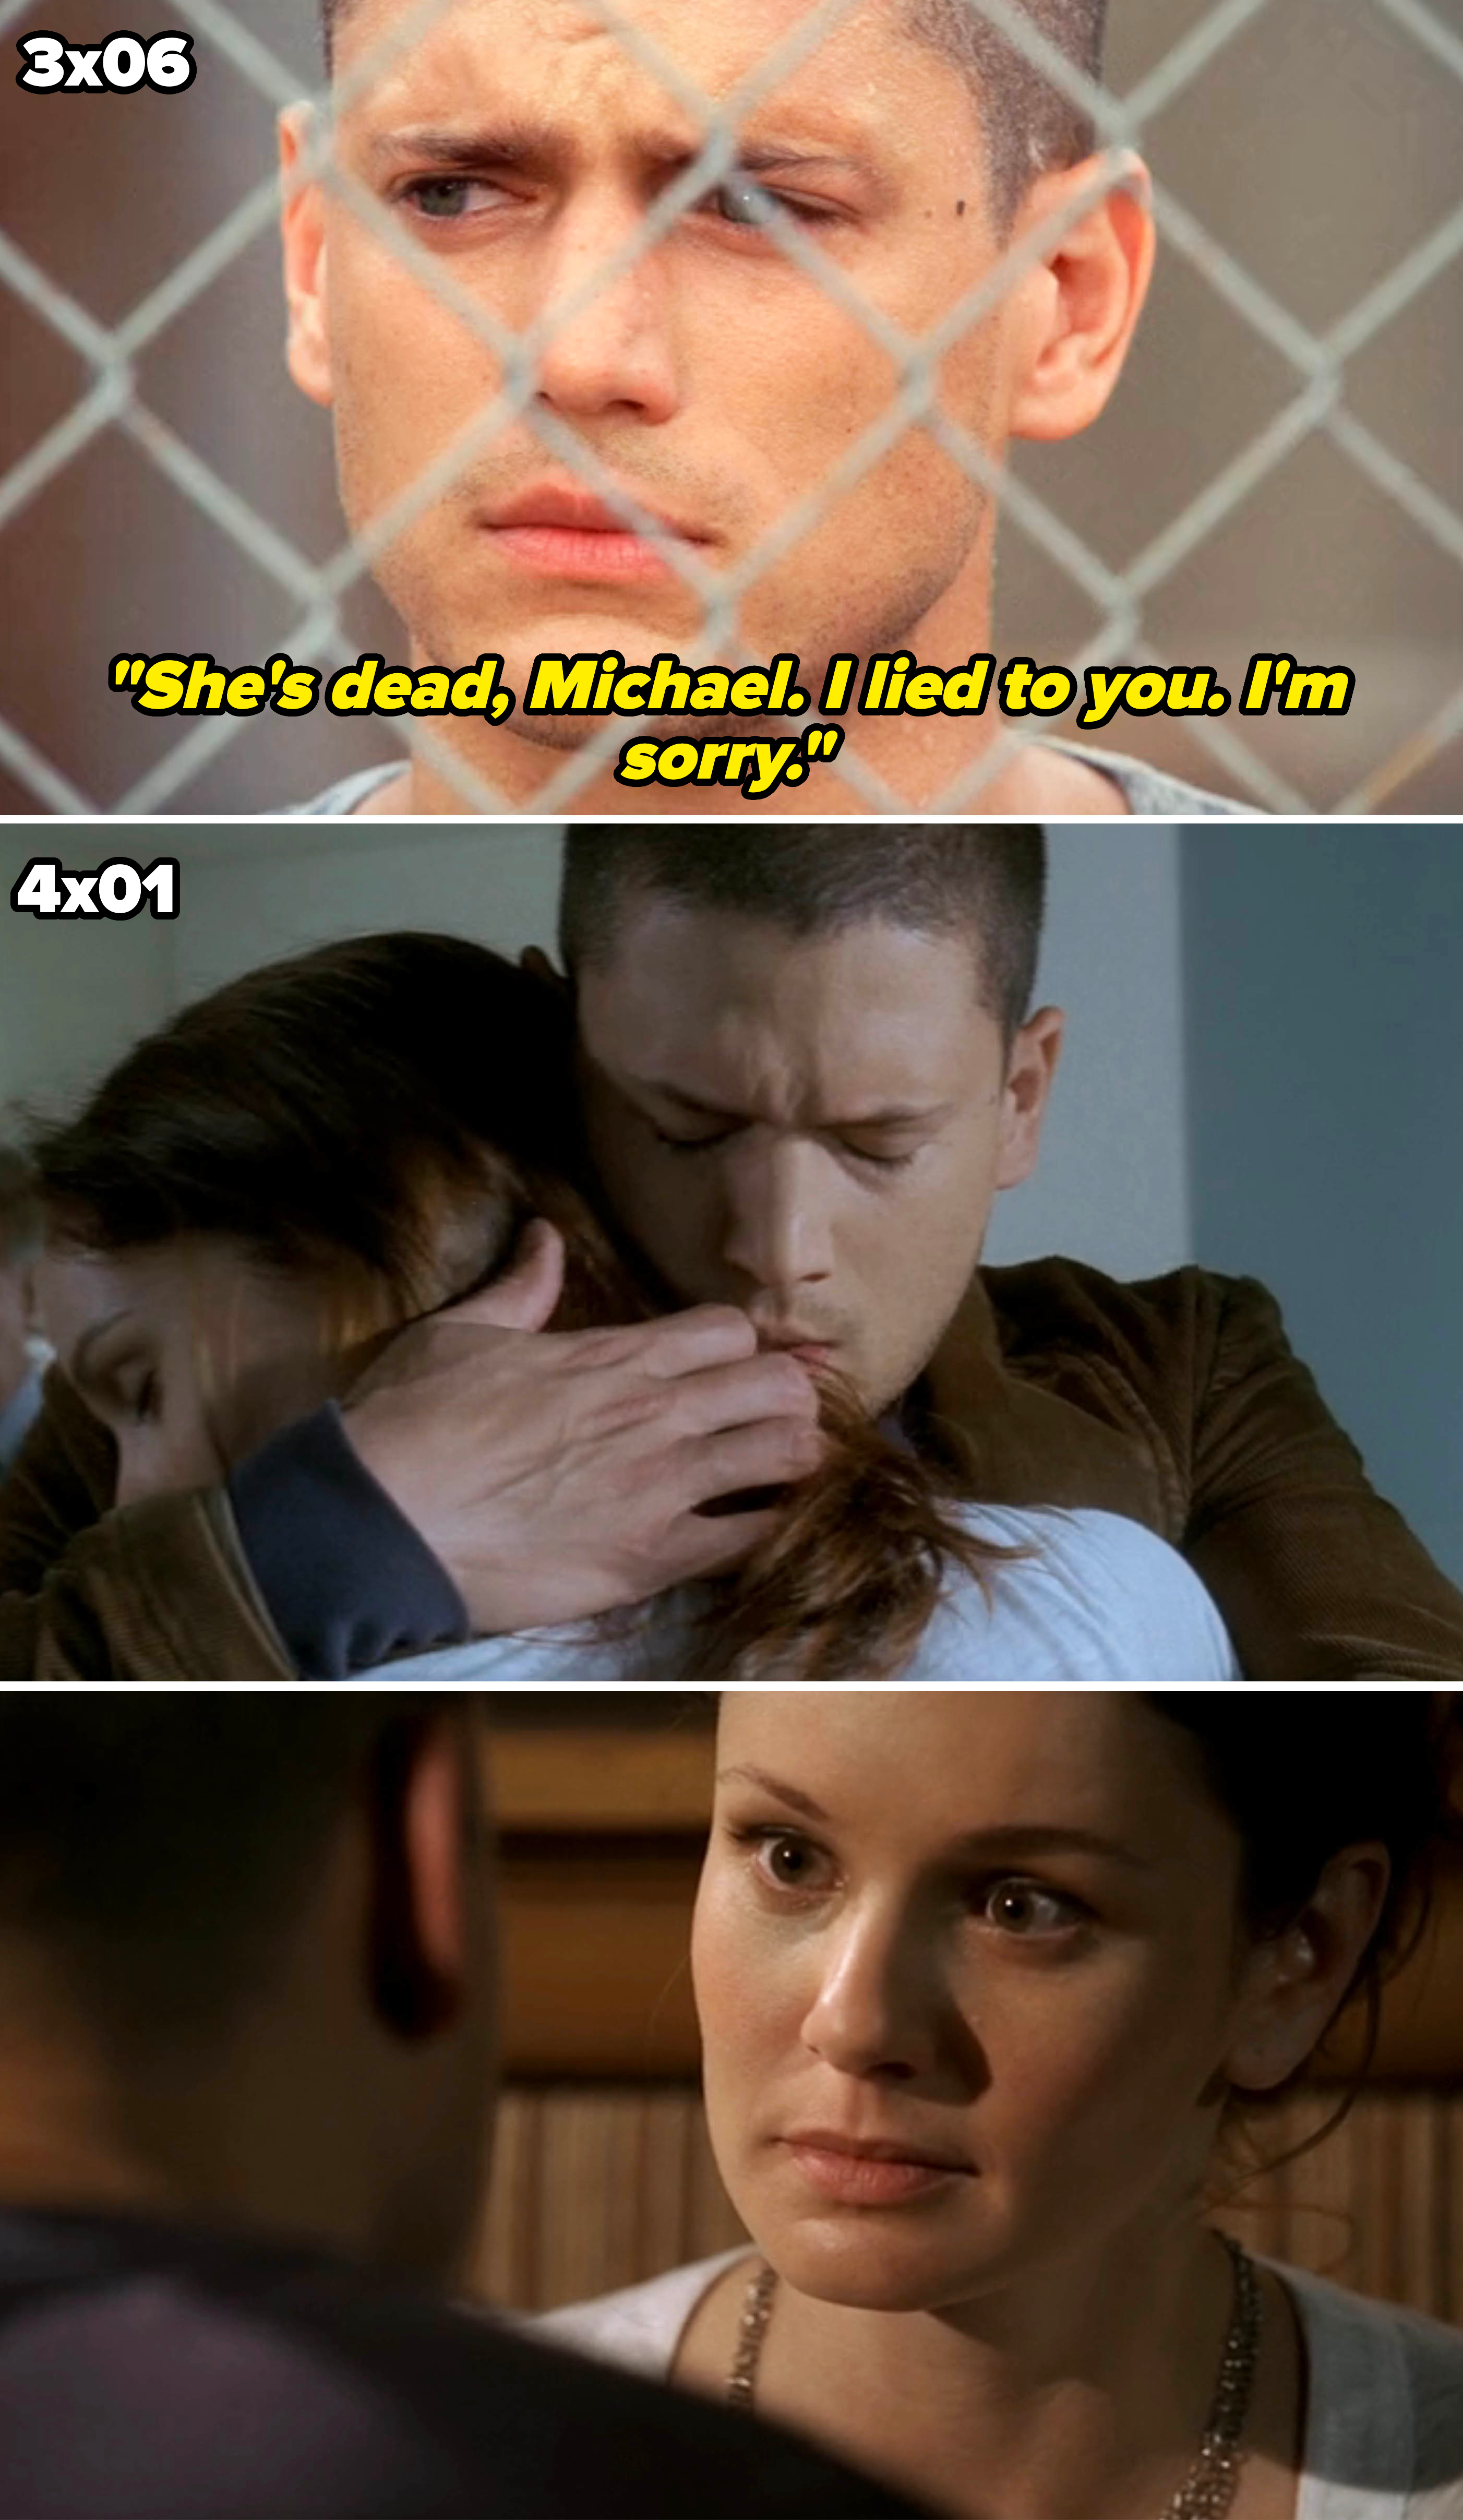 Three stills from &quot;Prison Break&quot; featuring Wentworth Miller as Michael Scofield and Sarah Wayne Callies as Sara Tancredi in emotional scenes